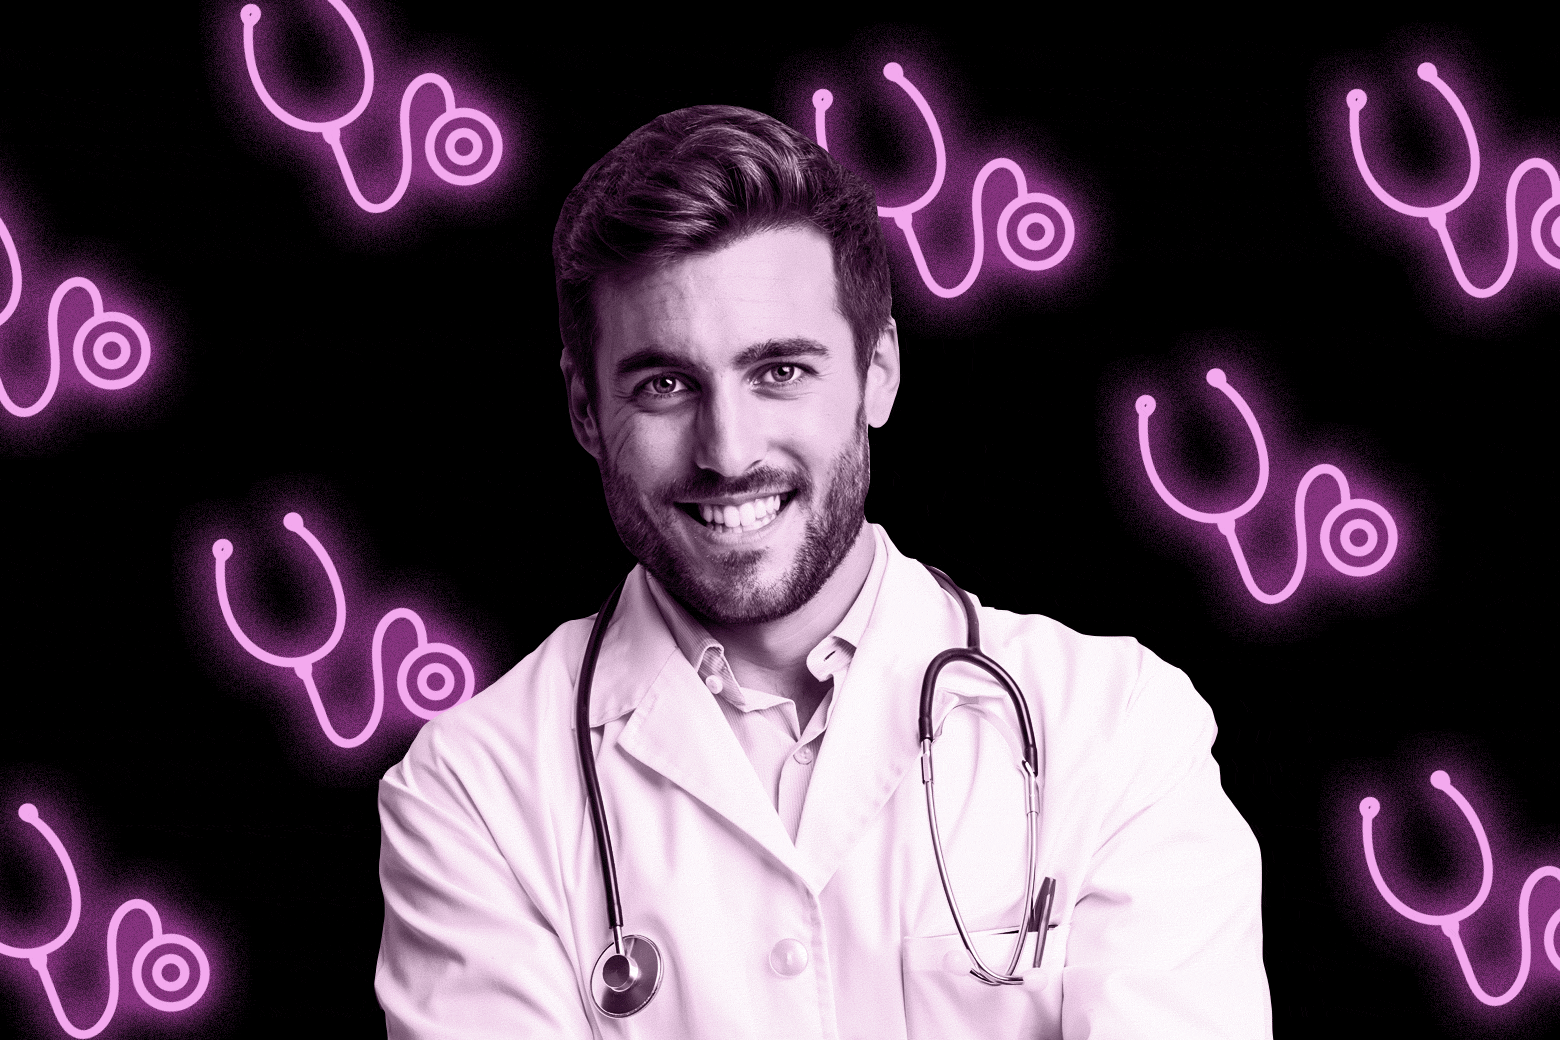 A smiling doctor wearing a stethoscope around his neck, with more stethoscopes glowing in the background.